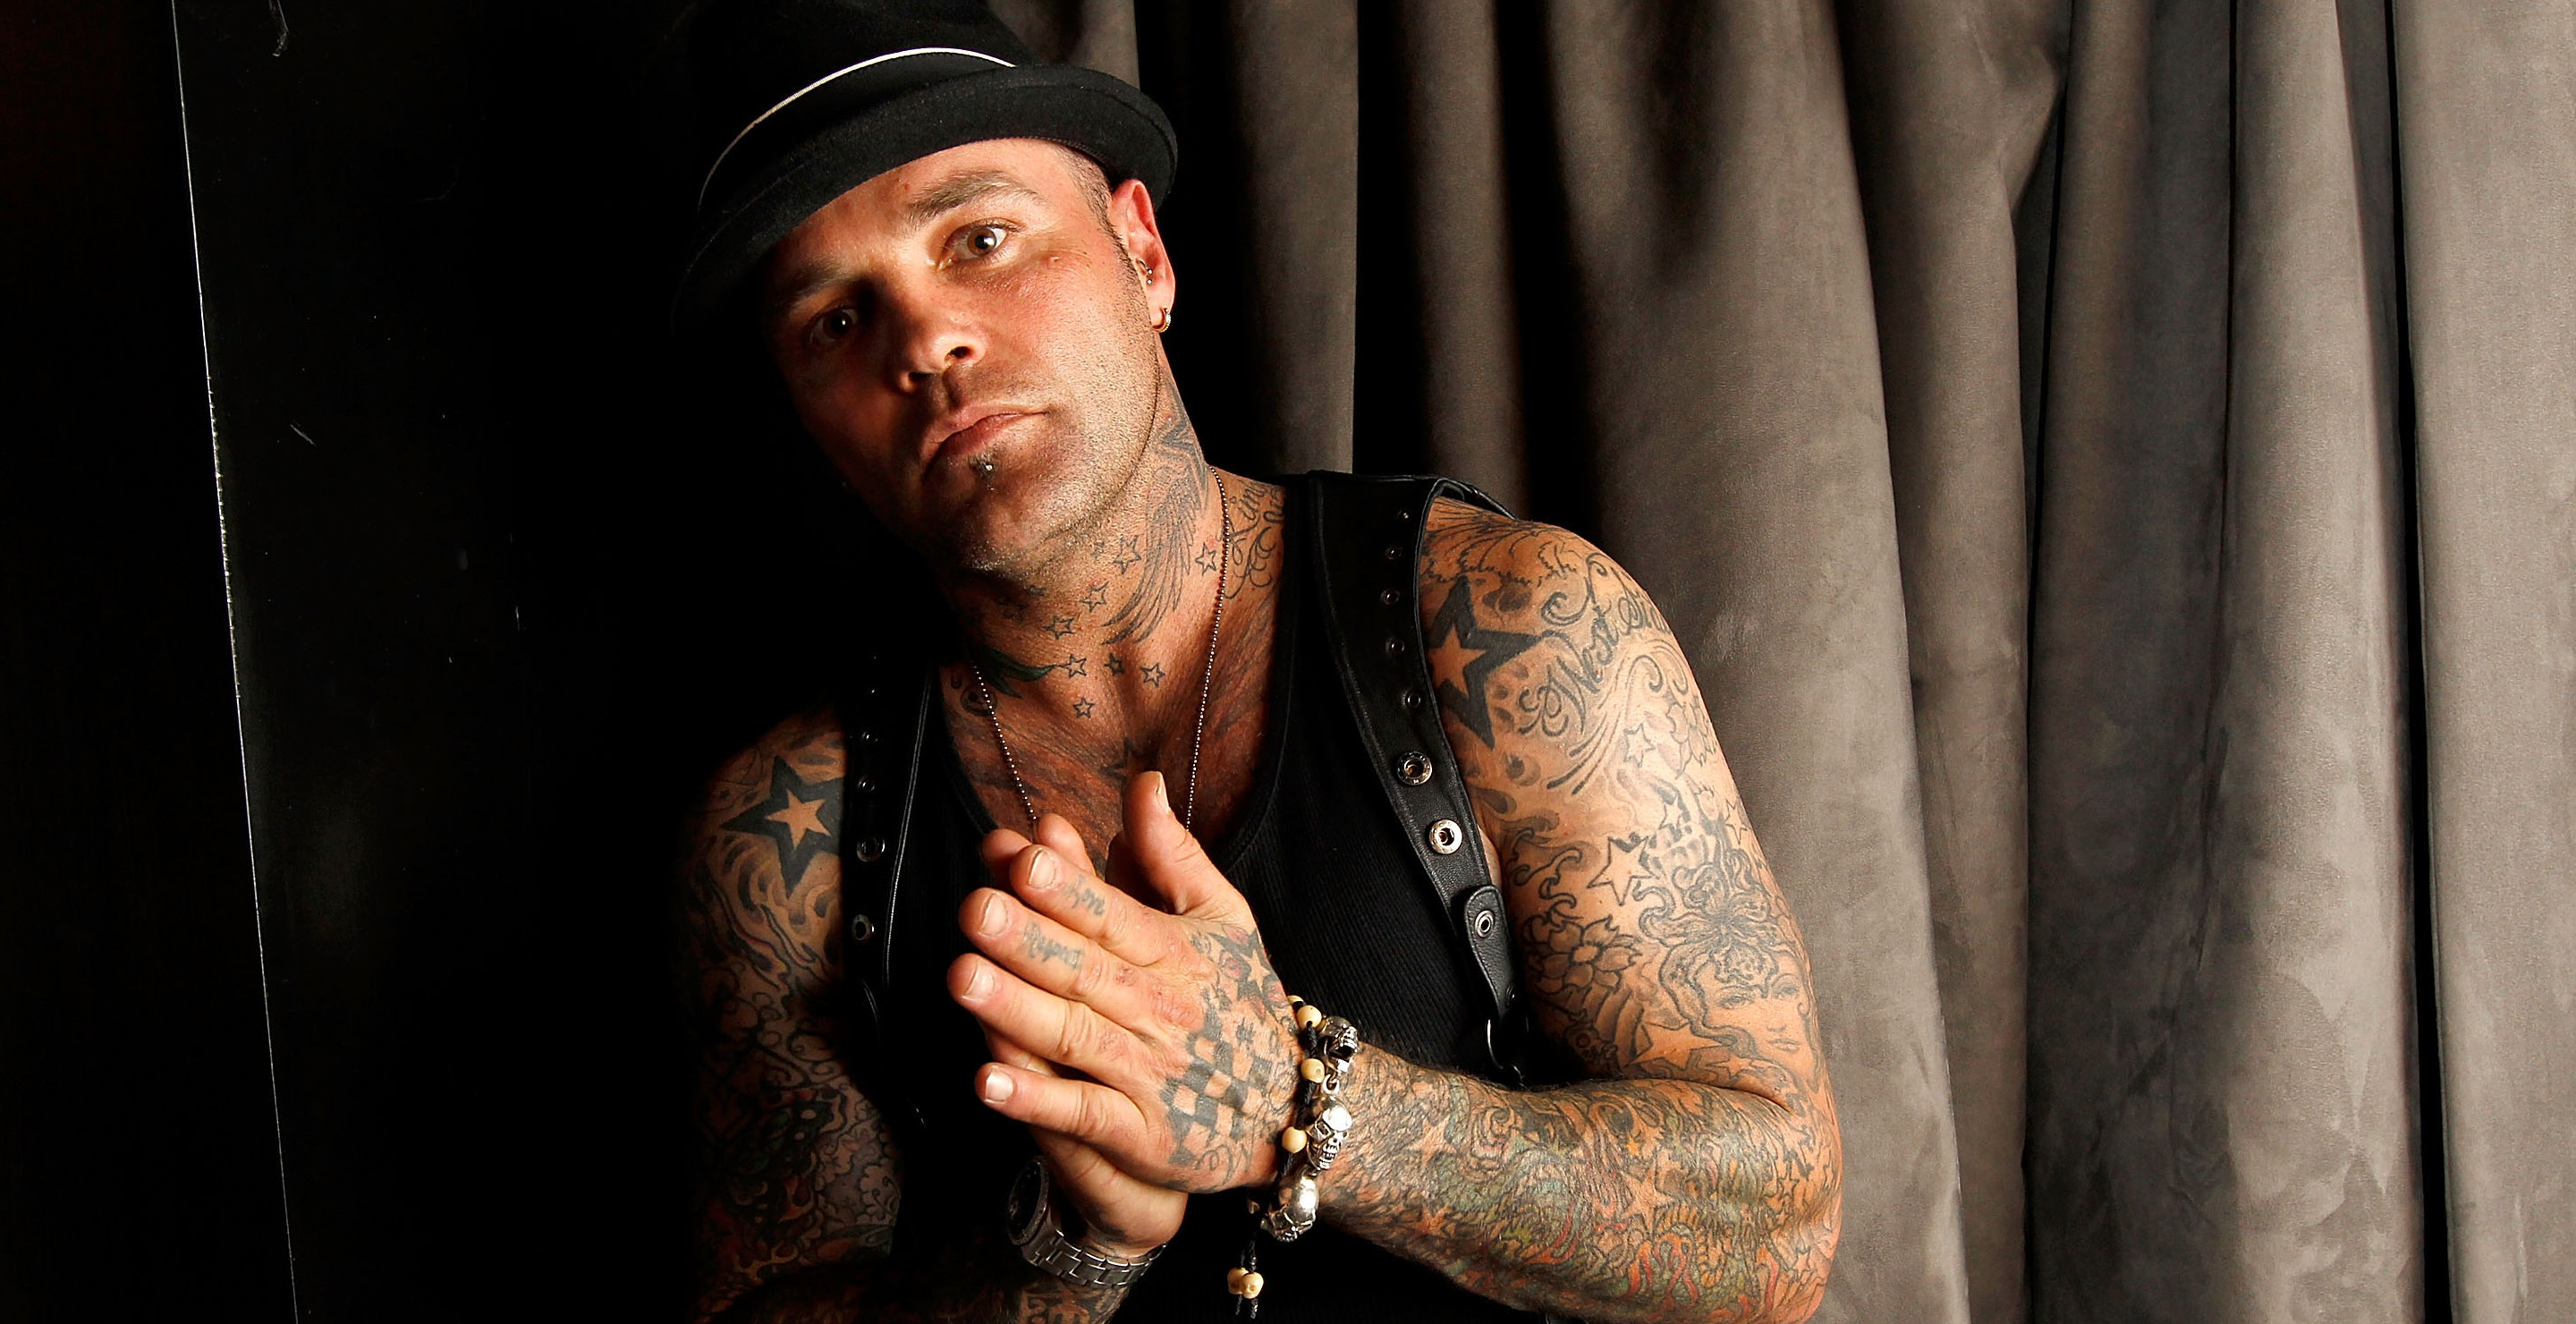 Shifty Shellshock, Crazy Town Frontman and ‘Butterfly’ Singer, Dies And Fans Are Distraught